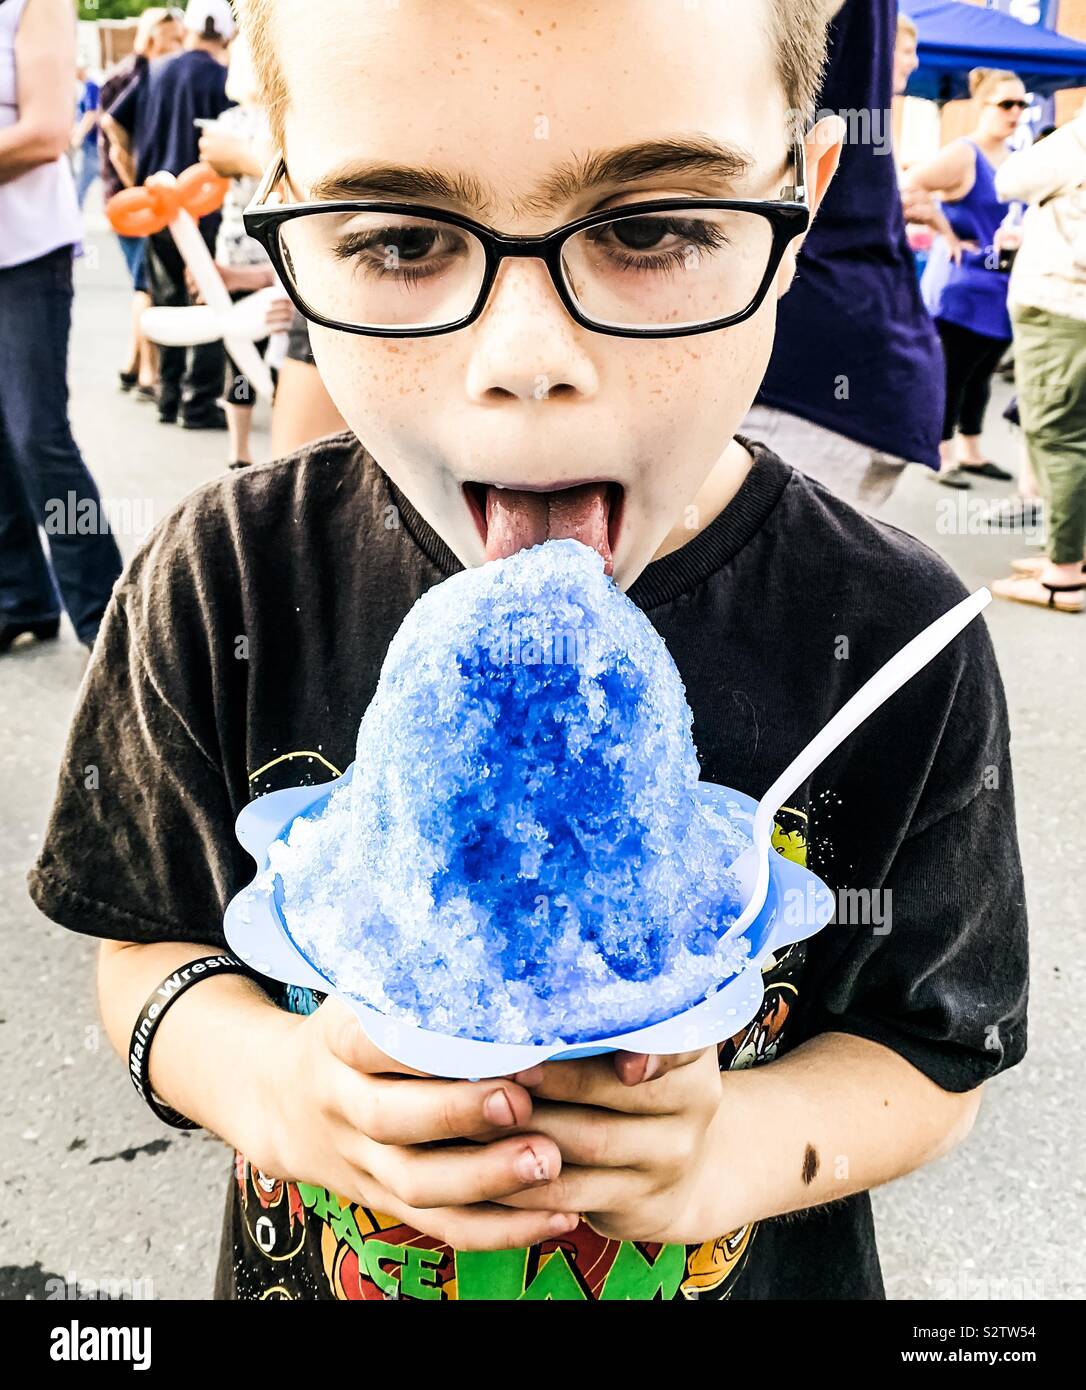 A nine year old boy enjoys a blue snow cone at a community summer event . Stock Photo